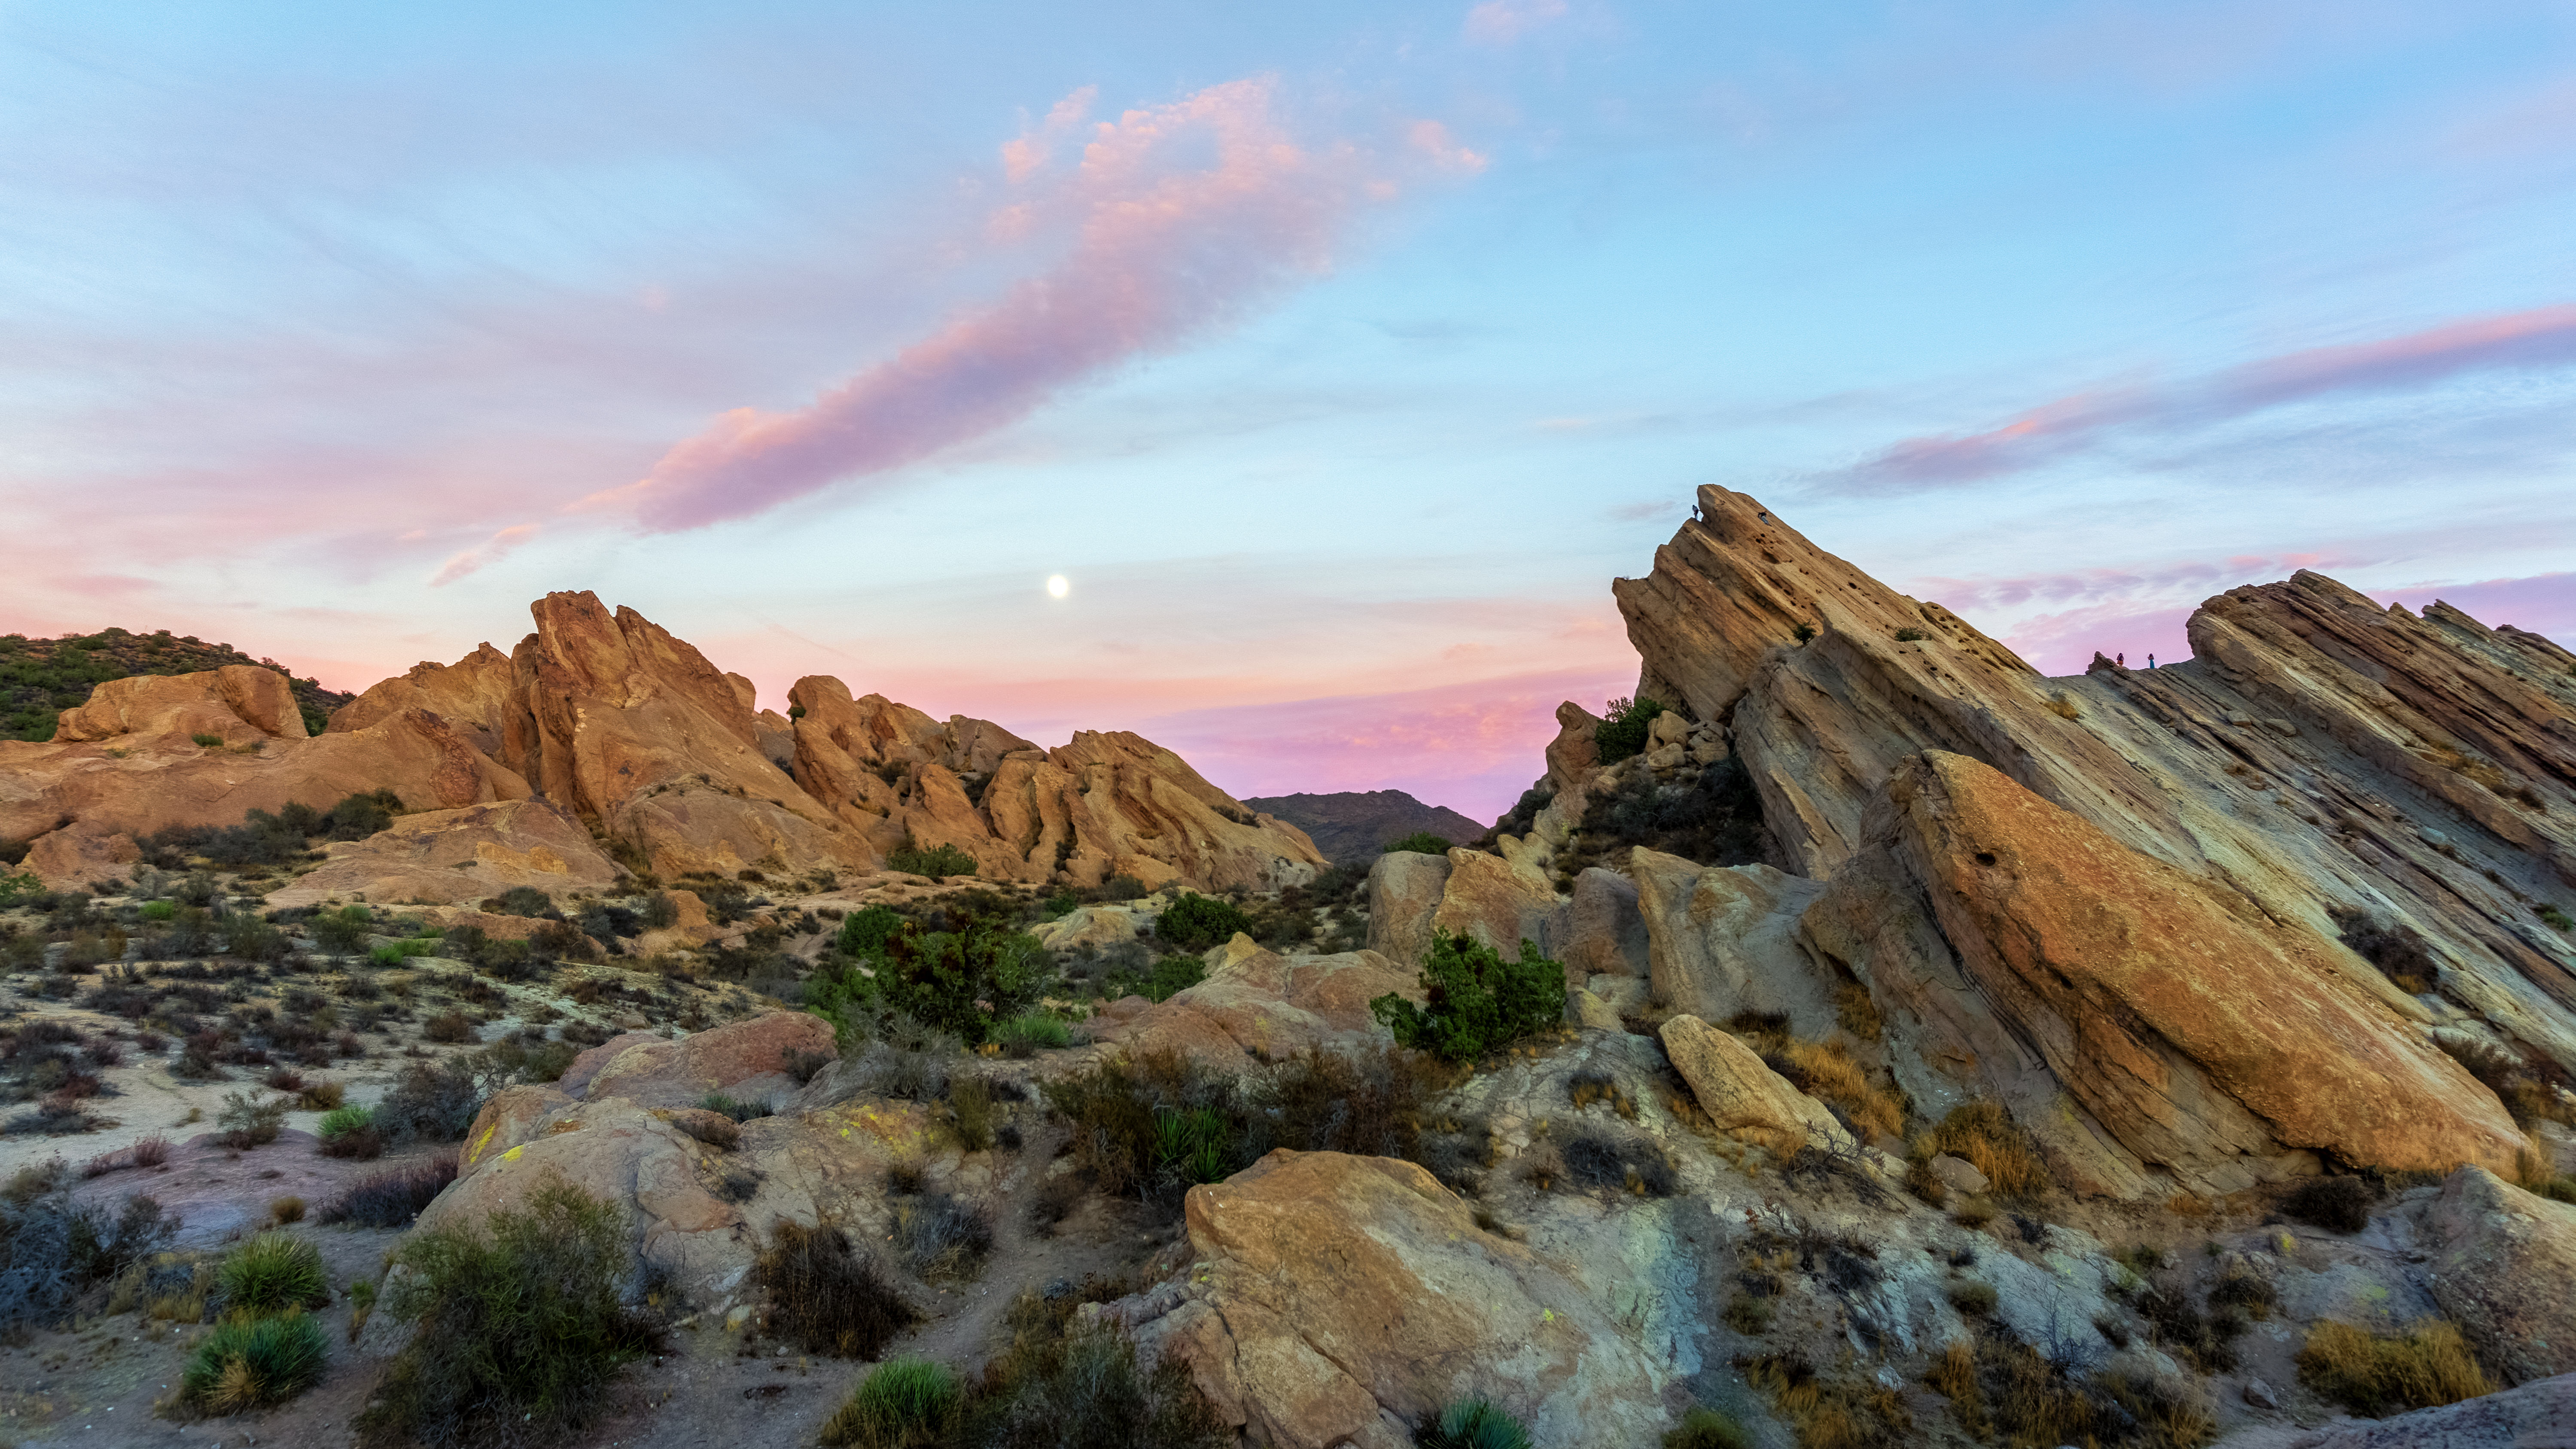 Hikers Provide Scale at Vasquez Rocks